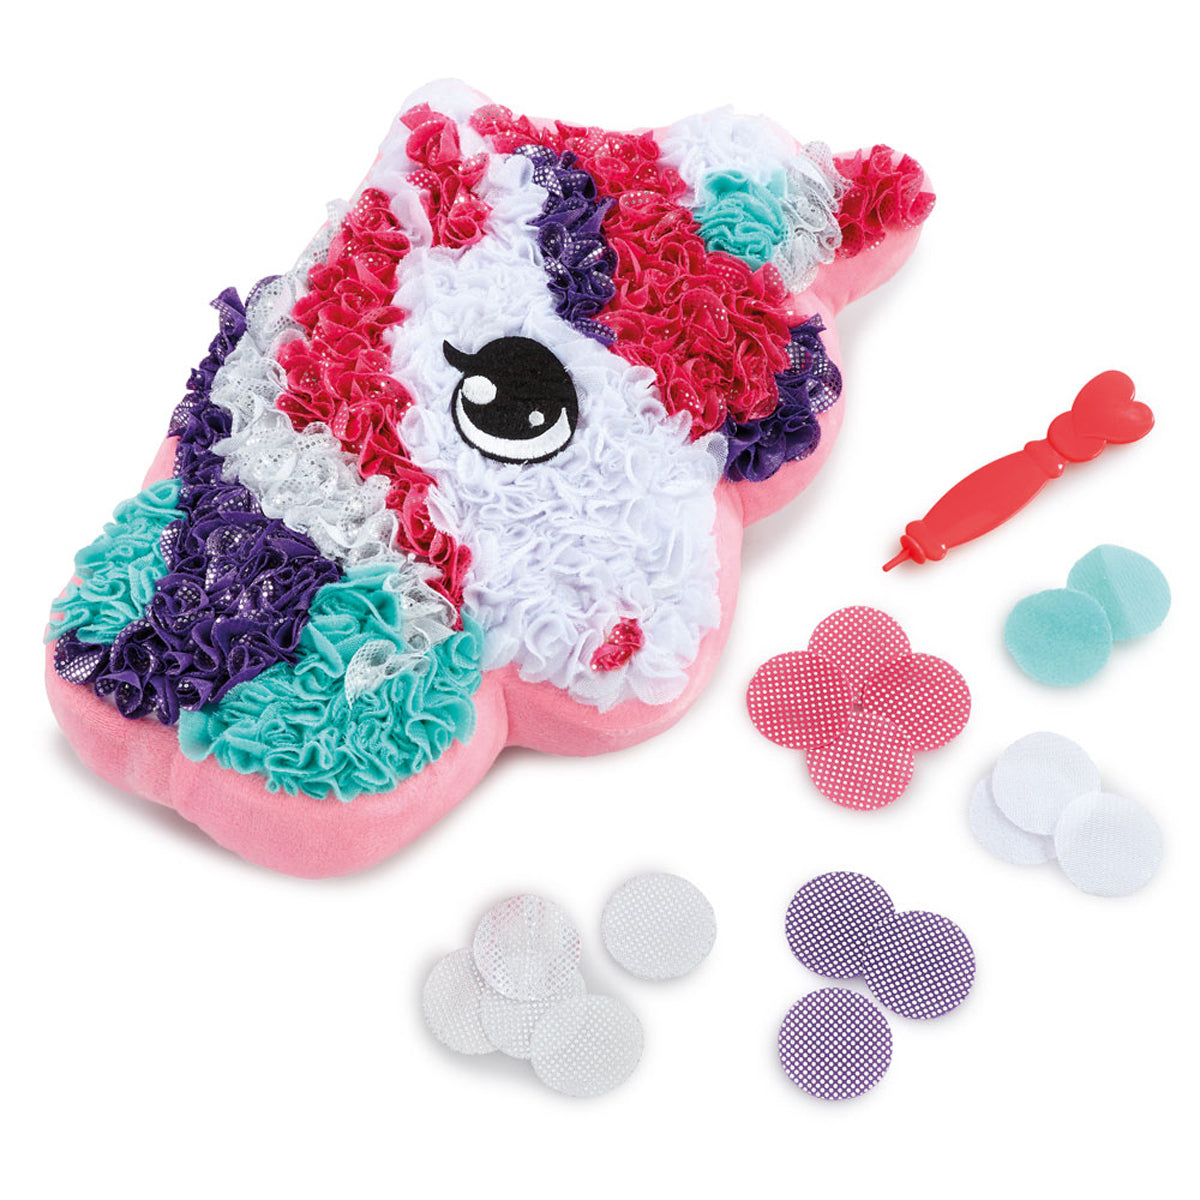 Out to Impress Make Your Own Unicorn Cushion Craft Set